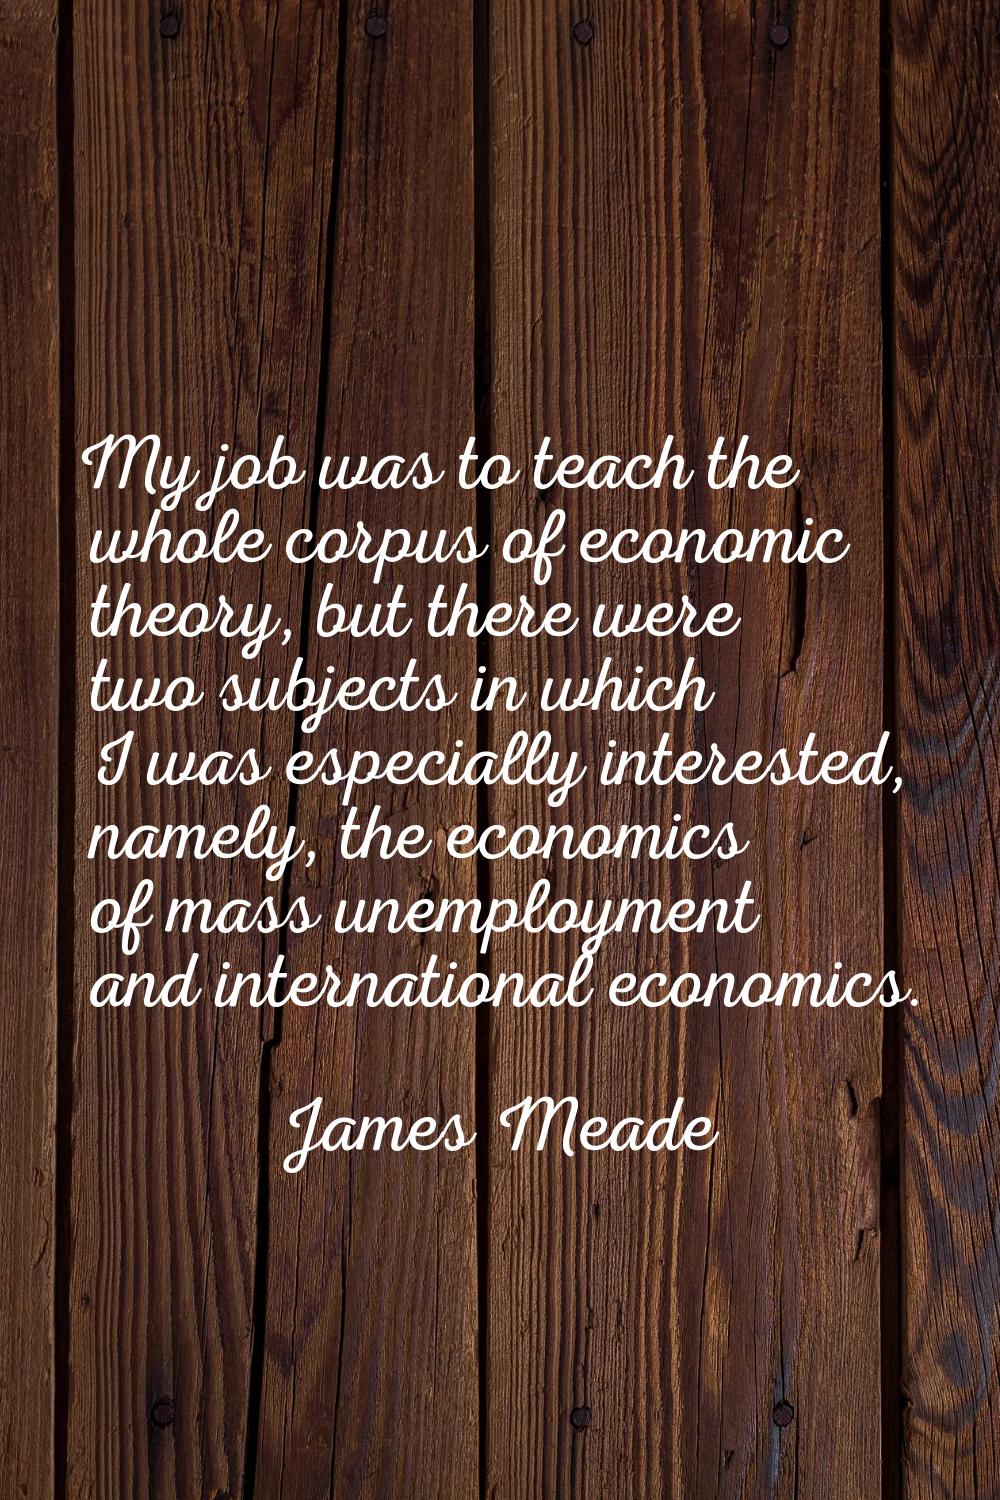 My job was to teach the whole corpus of economic theory, but there were two subjects in which I was